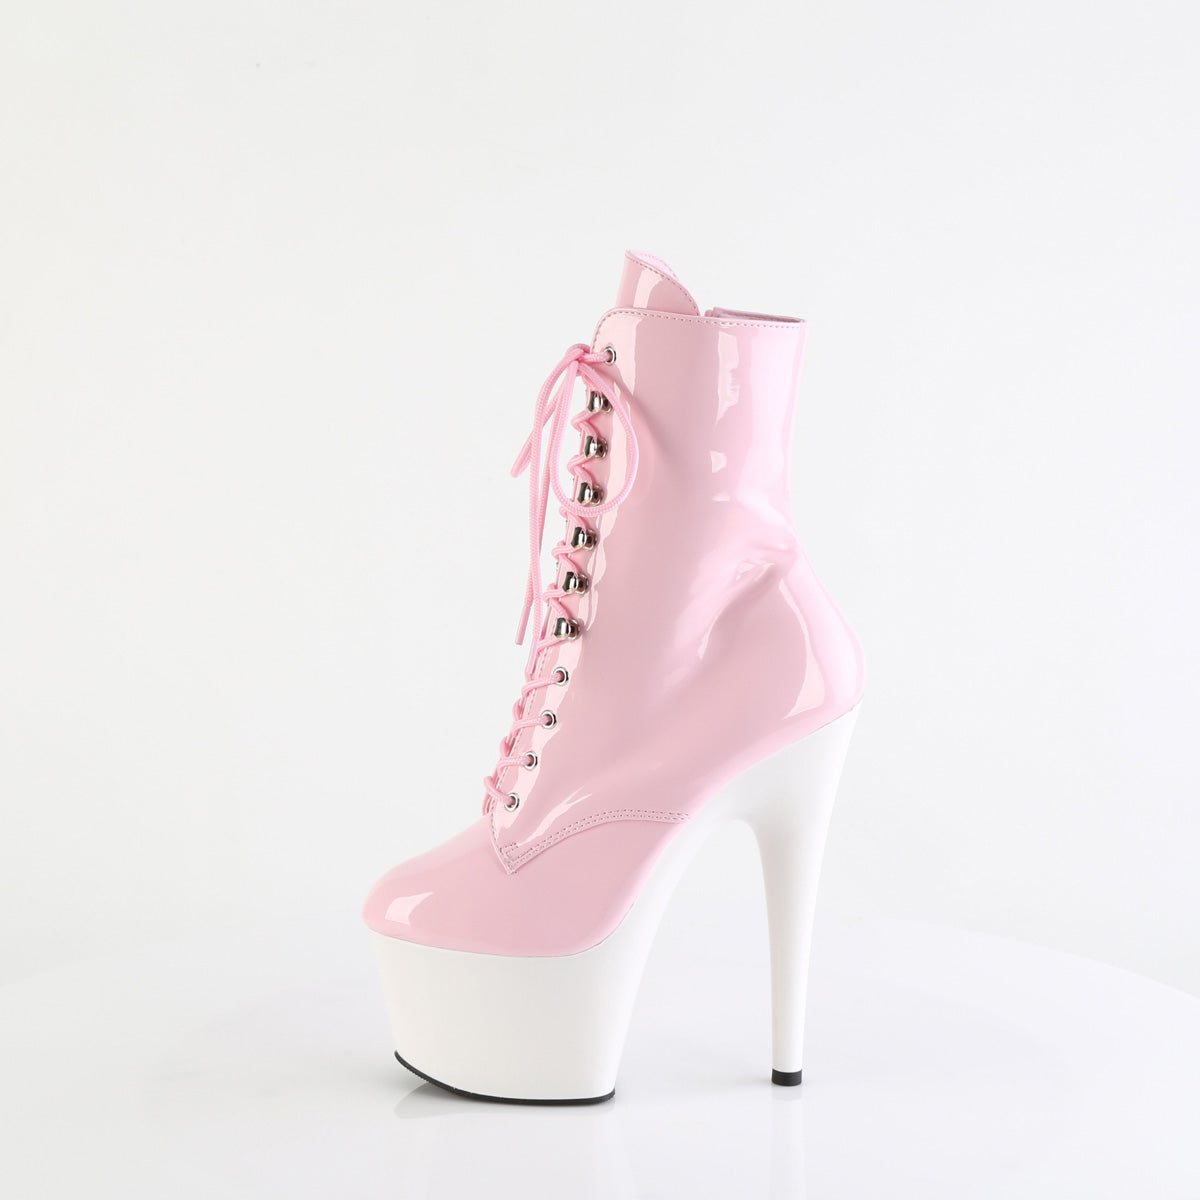 ADORE-1020 Pleaser B Pink Patent/White Platform Shoes [Sexy Footwear]